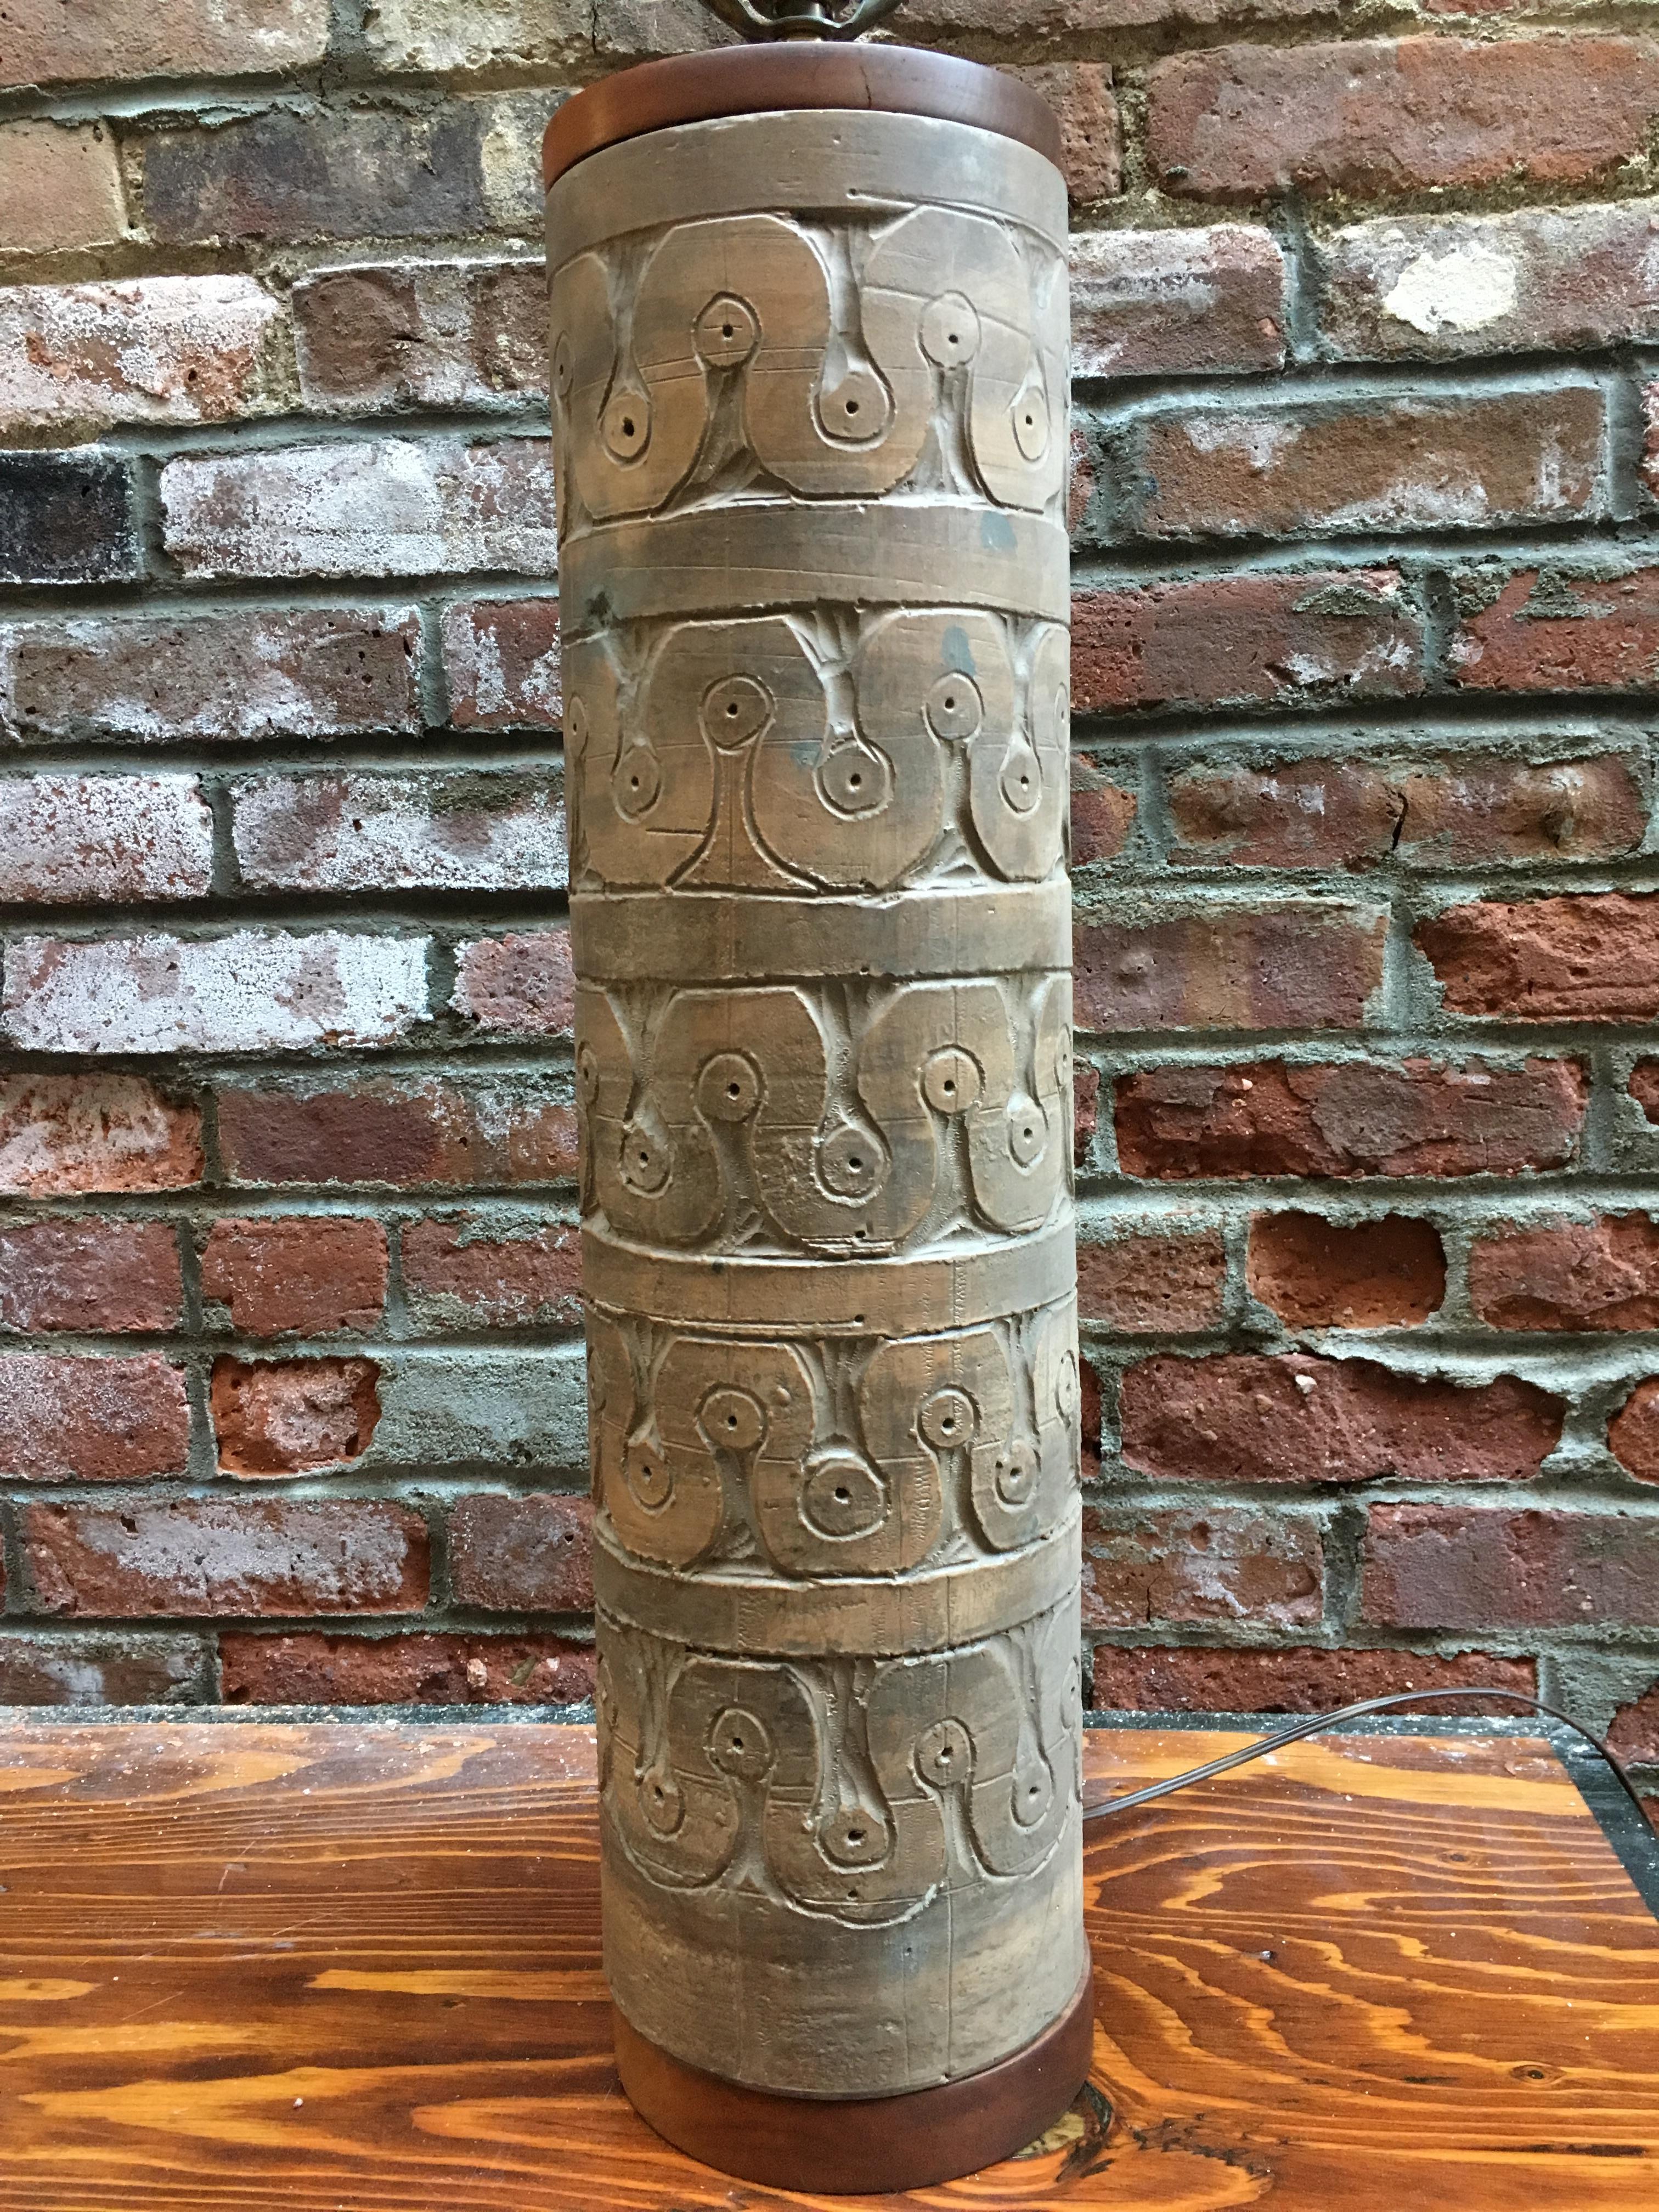 Massive cylindrical Italian art pottery table lamp by TIC for Raymor, circa 1950-1960. Decorated with incised continues wave pattern with an exterior matte glaze. Signature on bottom (see photo). Base and top are capped in solid walnut. Fully